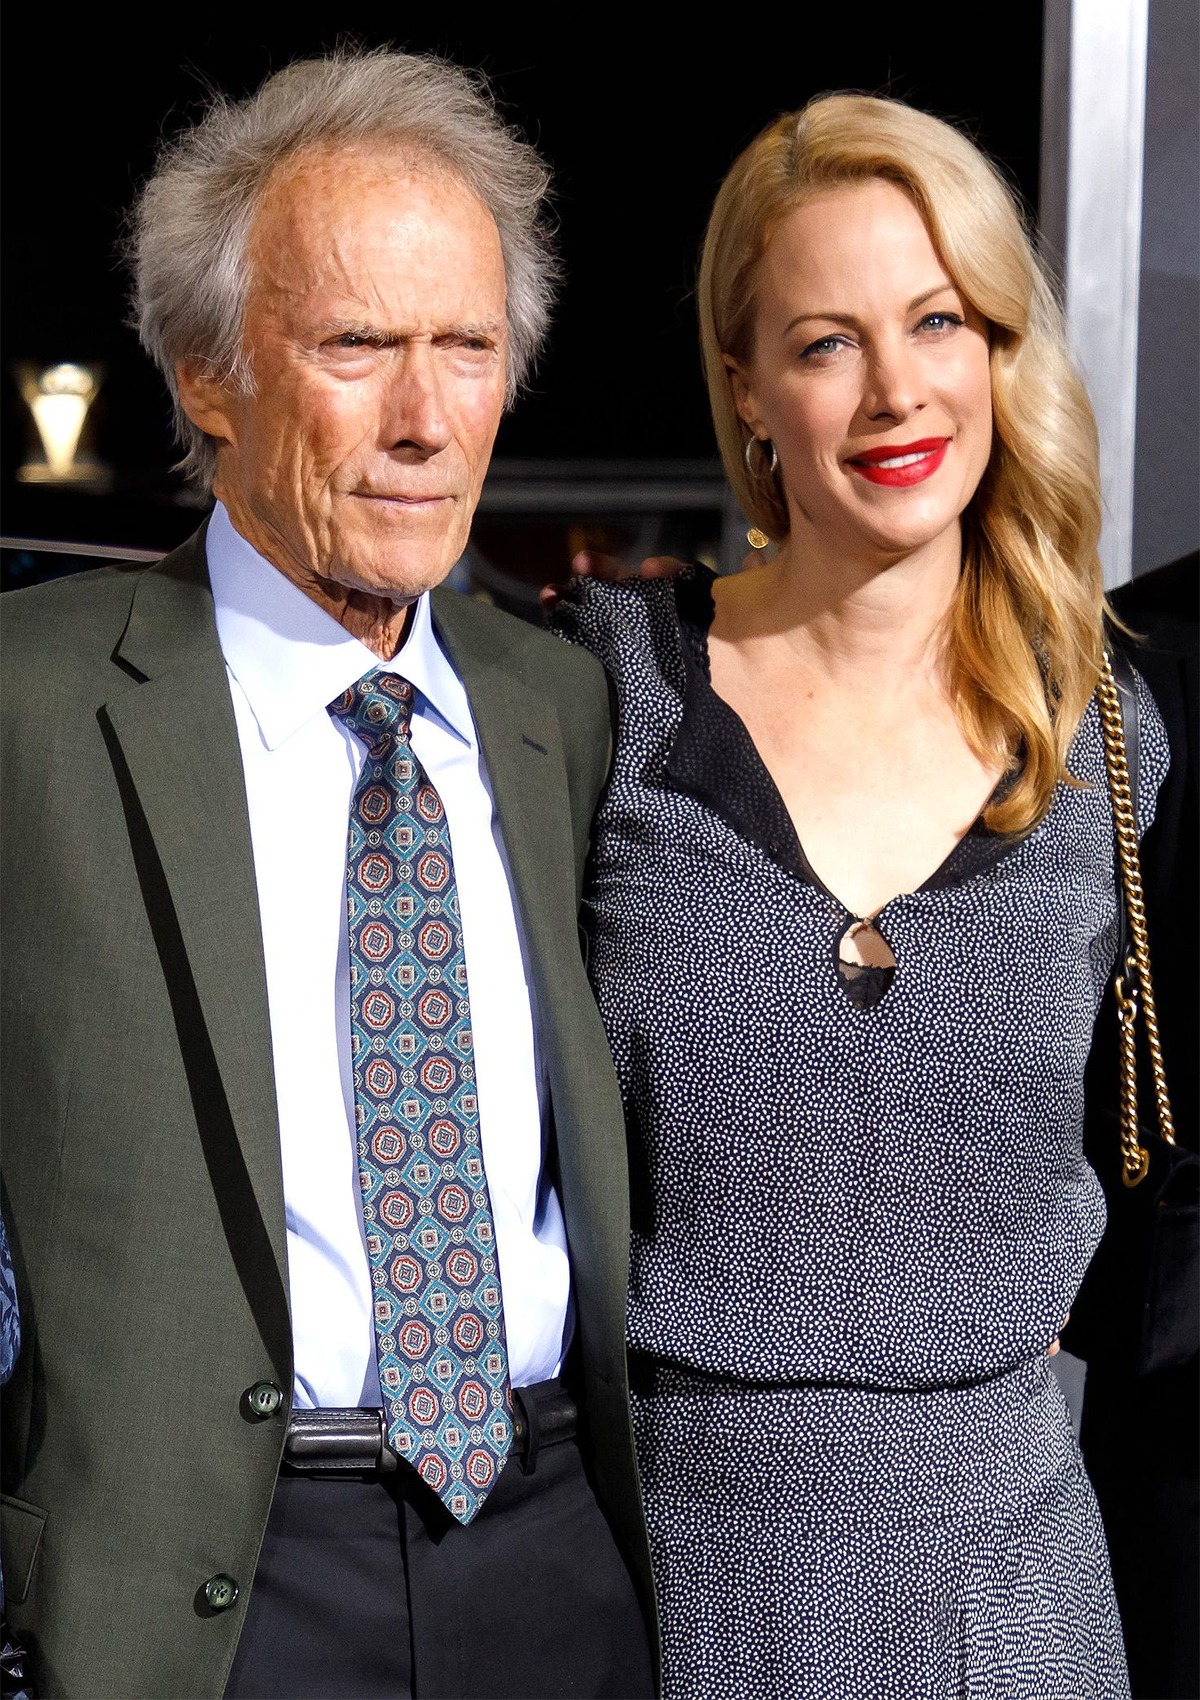 Clint and his daughter Allison